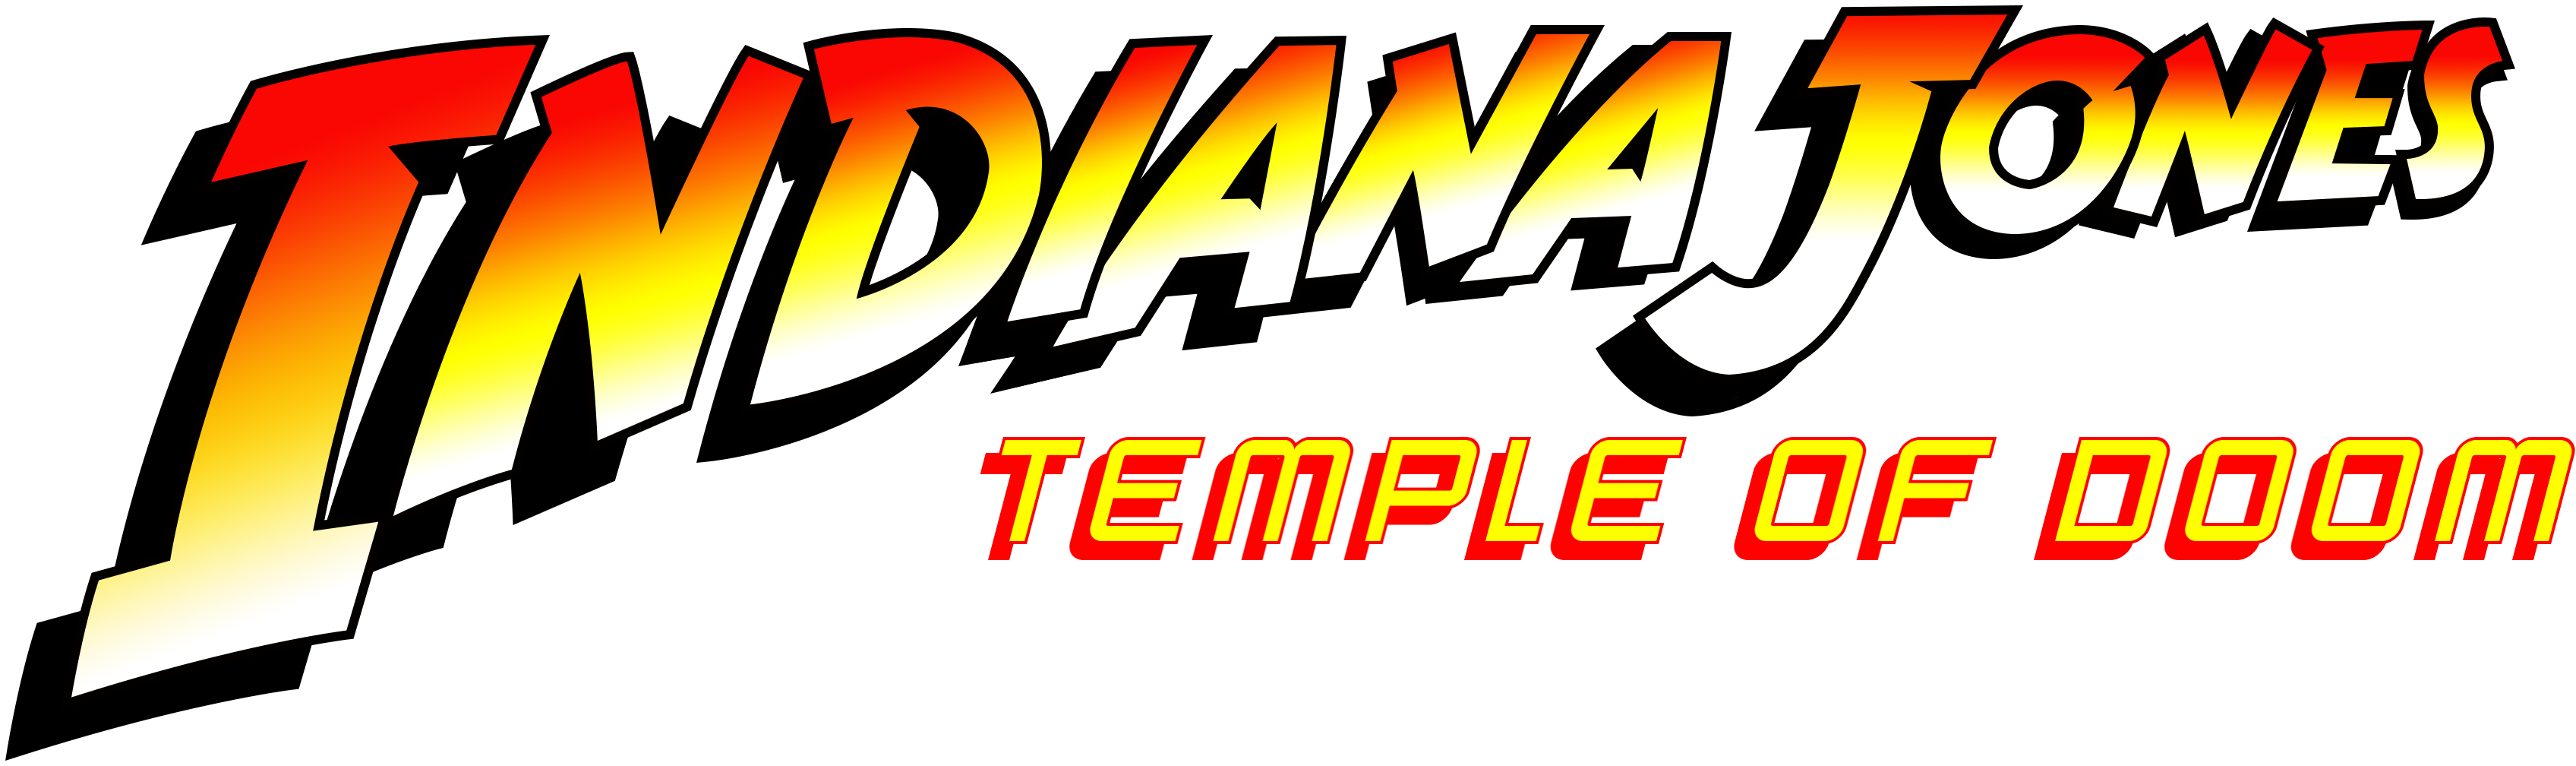 Indiana Jones And The Temple Of Doom Details LaunchBox Games Database